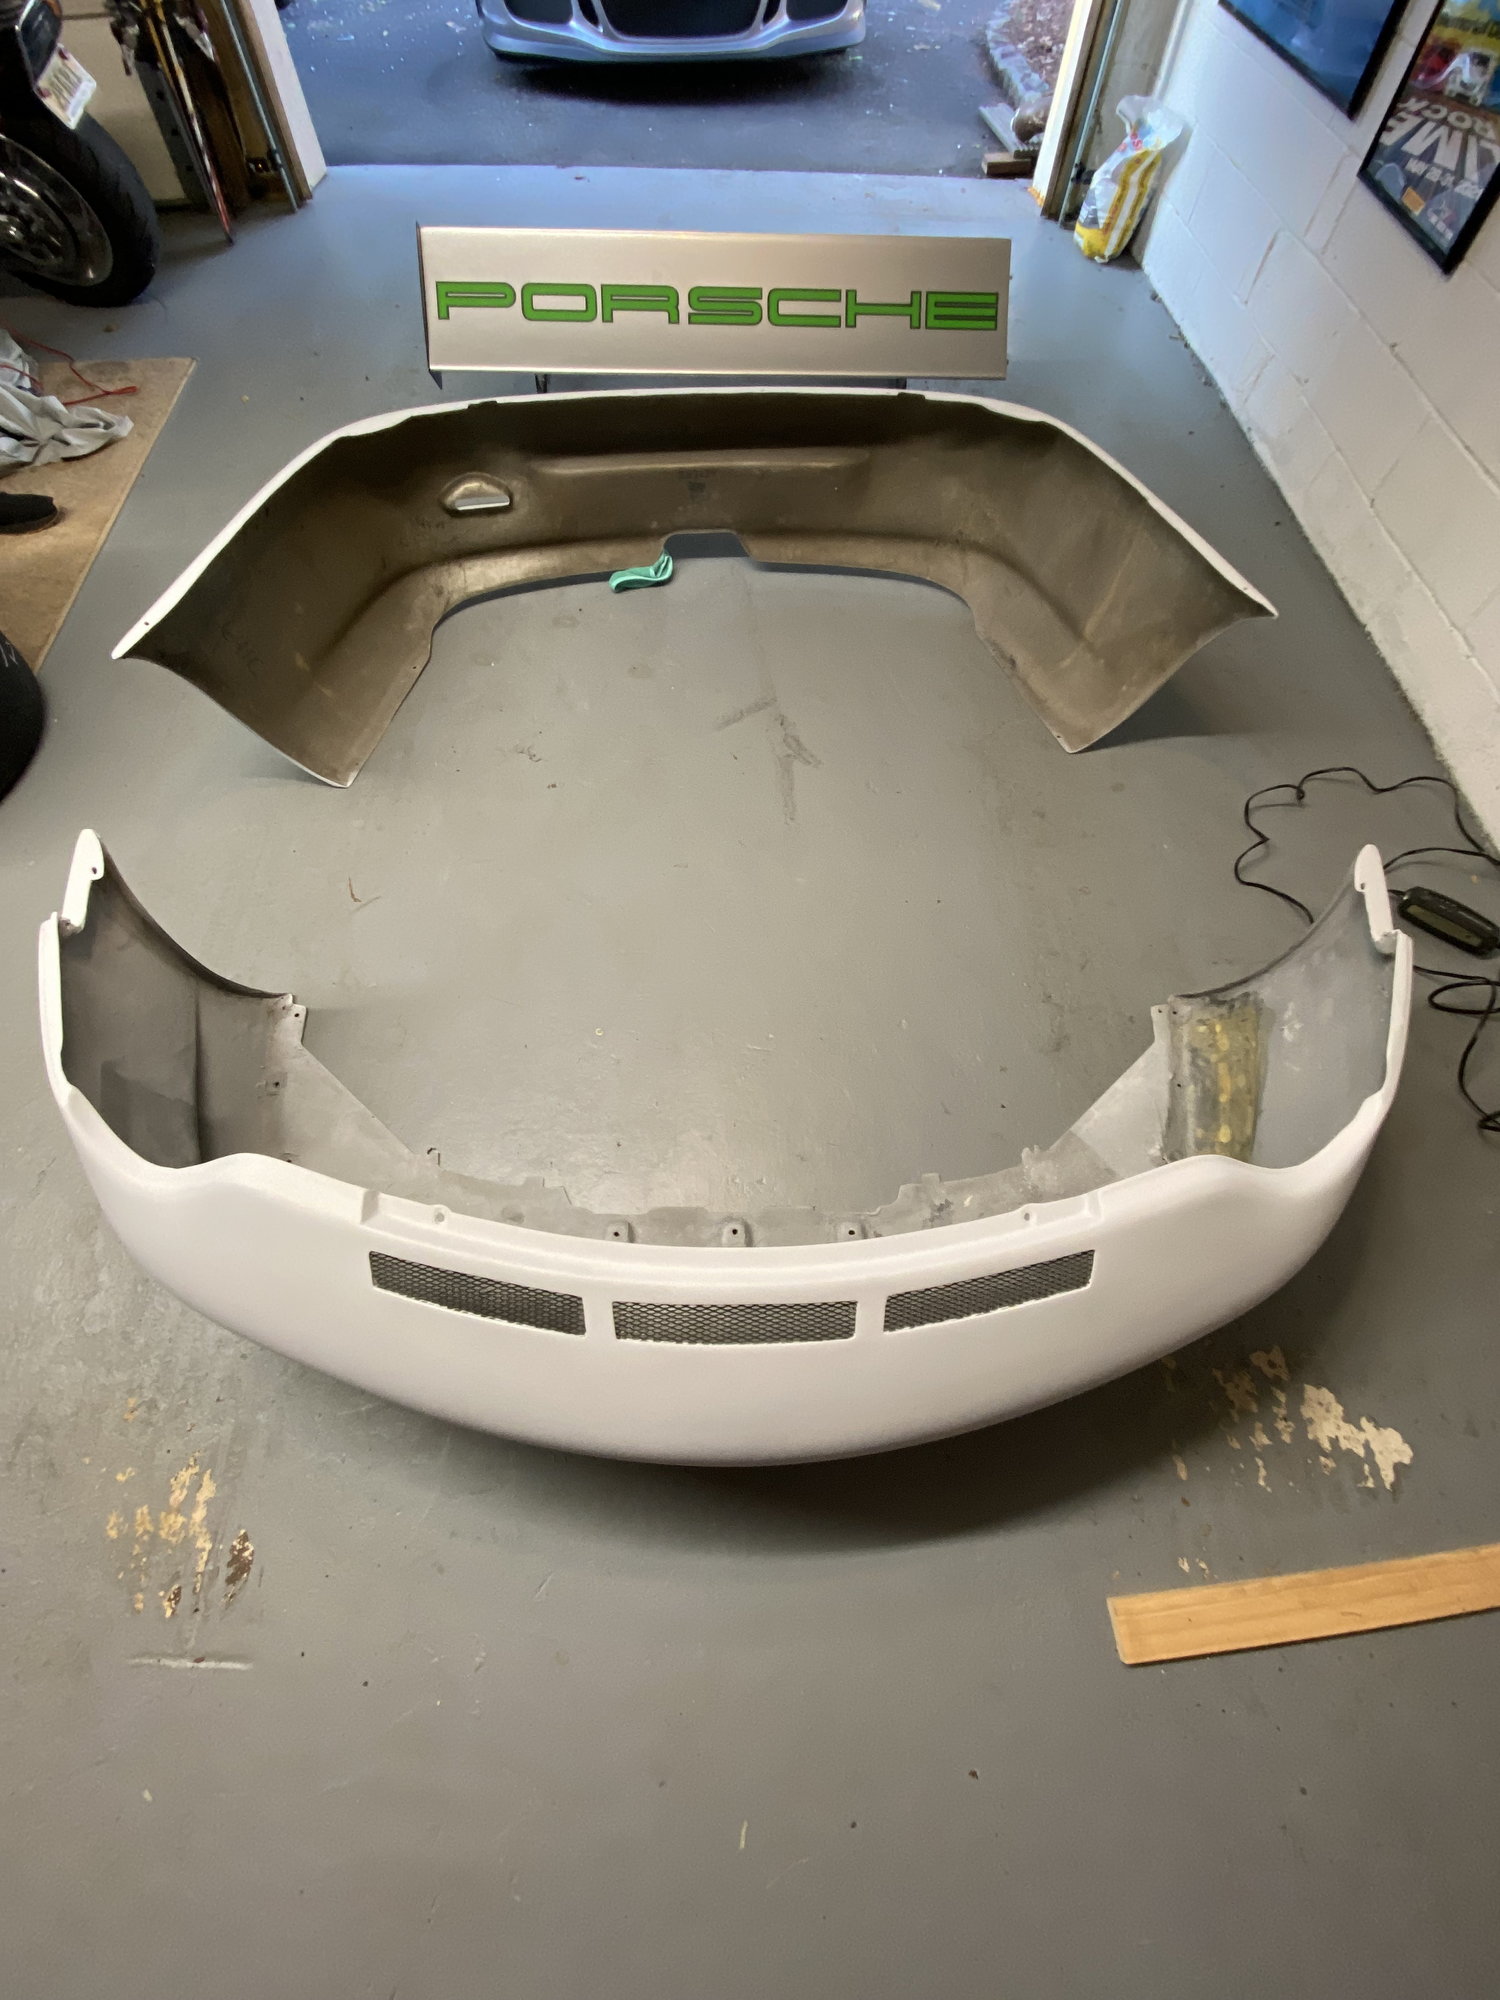 Exterior Body Parts - Porsche 996 Cup Car body parts (Getty) - Used - Cranford, NJ 7016, United States